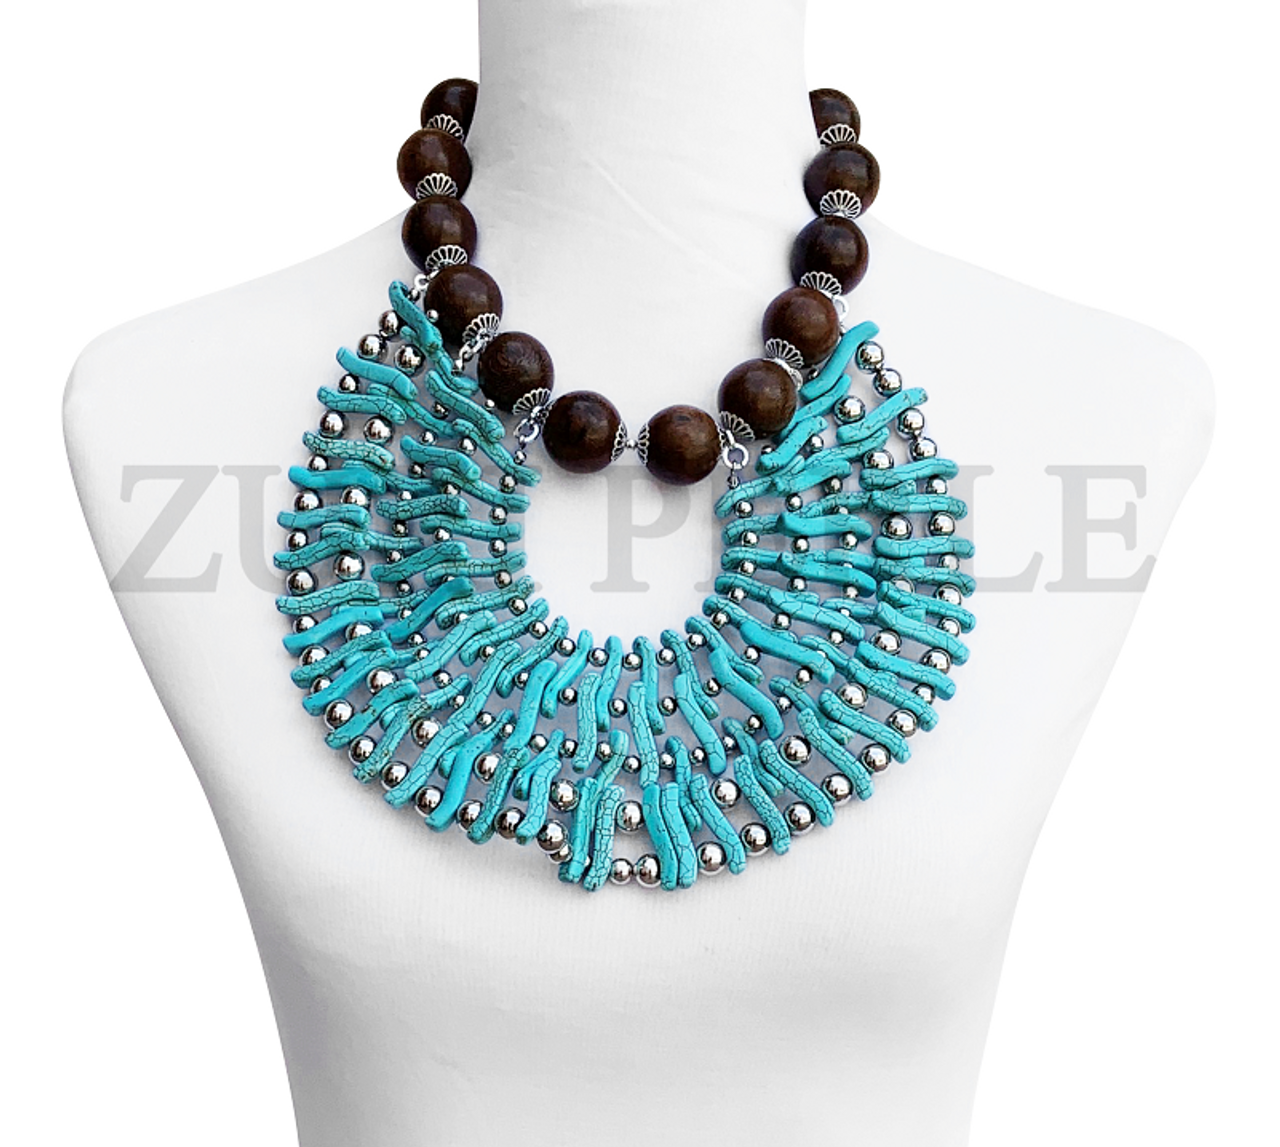 Sterling silver chain necklace with African wood beads - Judy Klimek  Statement Jewelry